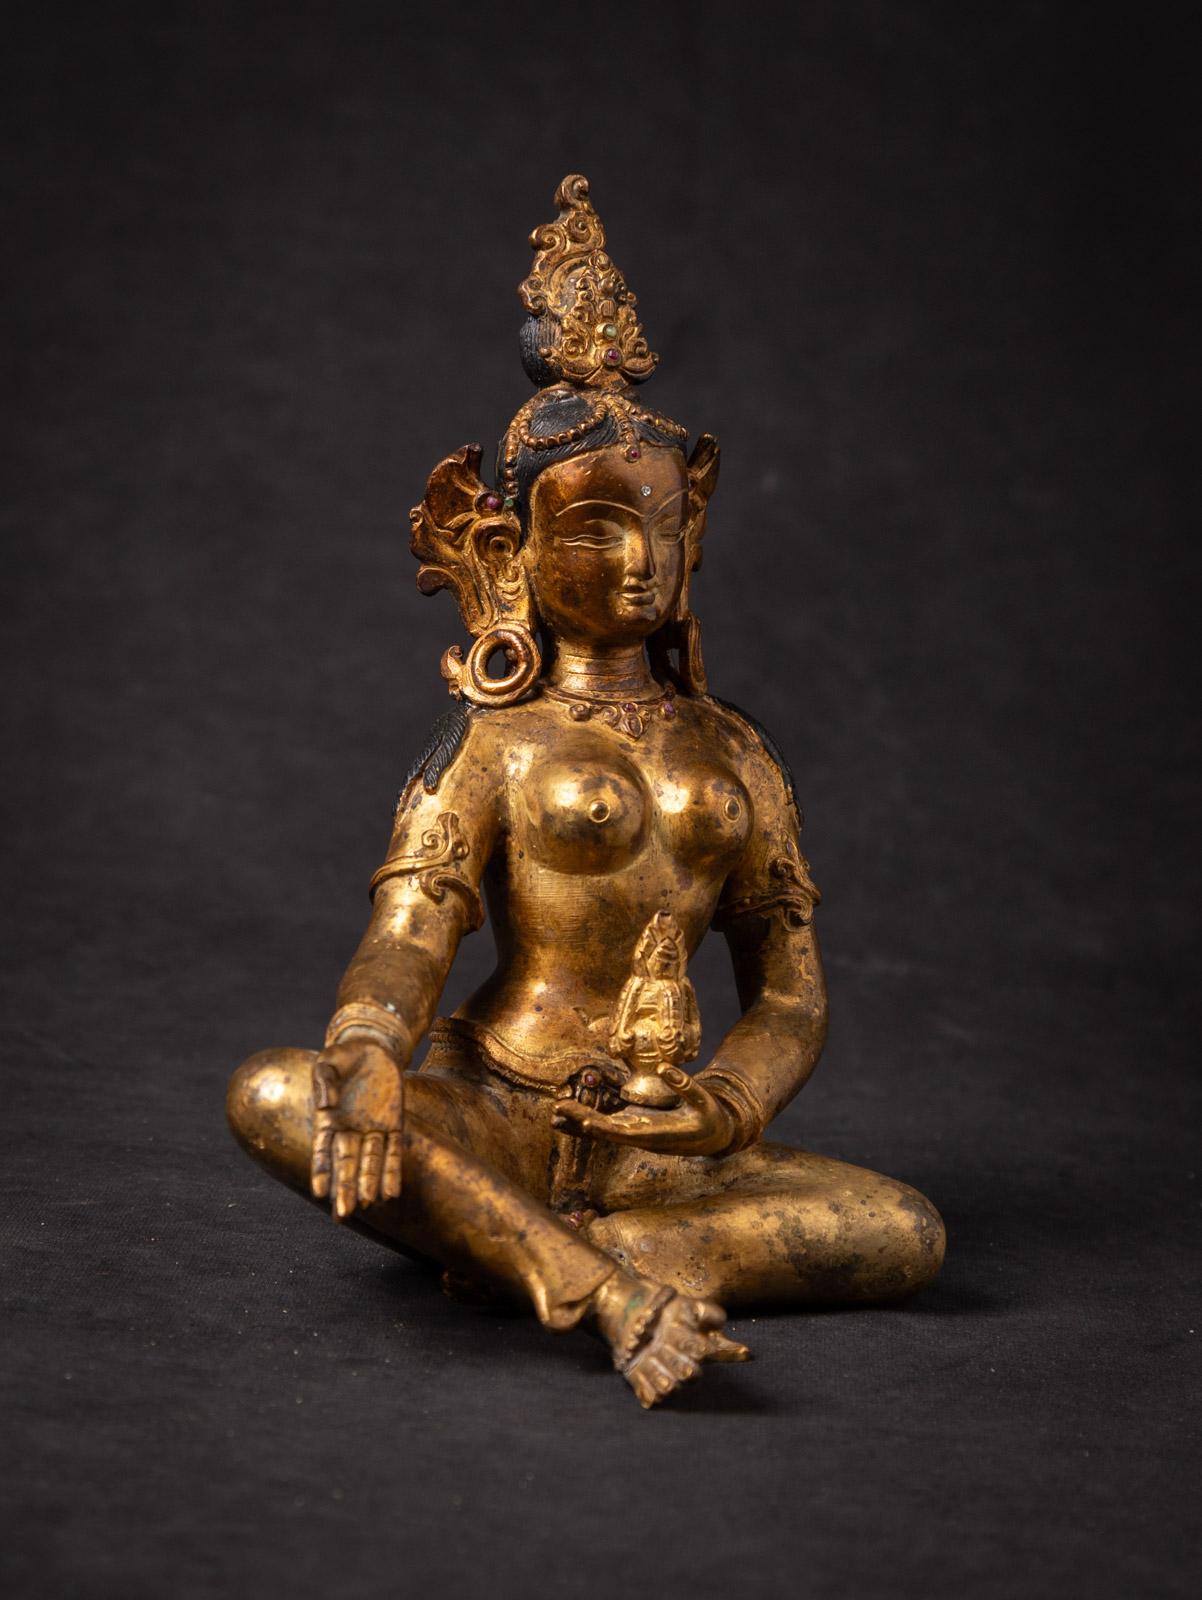 This Old bronze Nepali Basundhara statue Inlaid with real gem stones is an exquisite representation of a revered figure in Tibetan Buddhism. Crafted from bronze, it stands at a height of 20,2 cm, with dimensions of 14,5 cm in width and 12 cm in